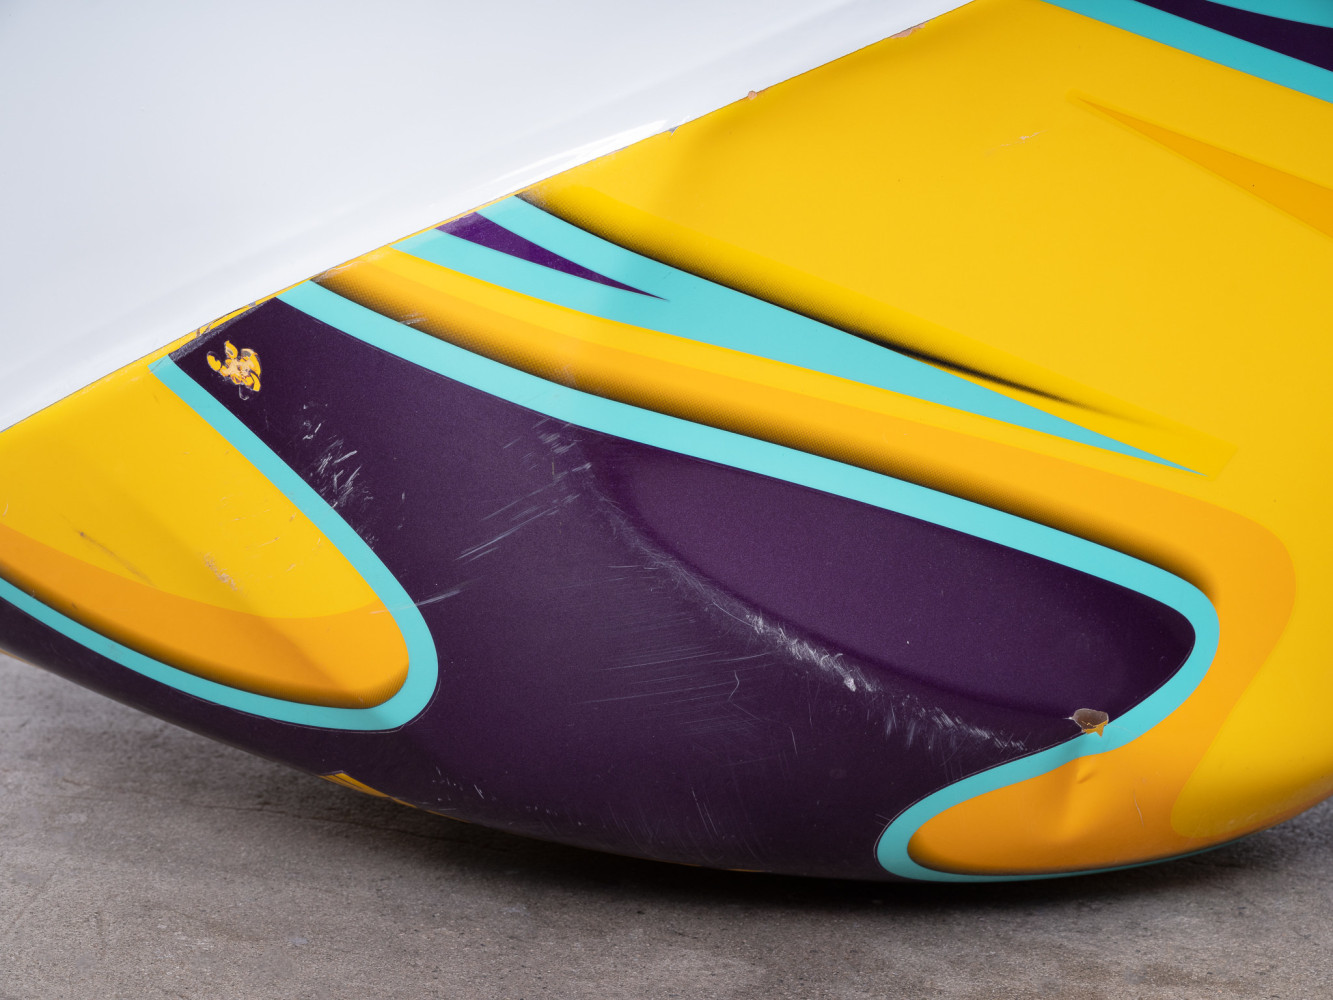 Elad Lassry

Untitled (Carrier, Yellow)

2019

Welded and painted steel

32 1/4 x 19 1/2 x 15 inches (81.9 x 49.5 x 38.1 cm)

Unique

EL 514

$35,000

&amp;nbsp;

INQUIRE